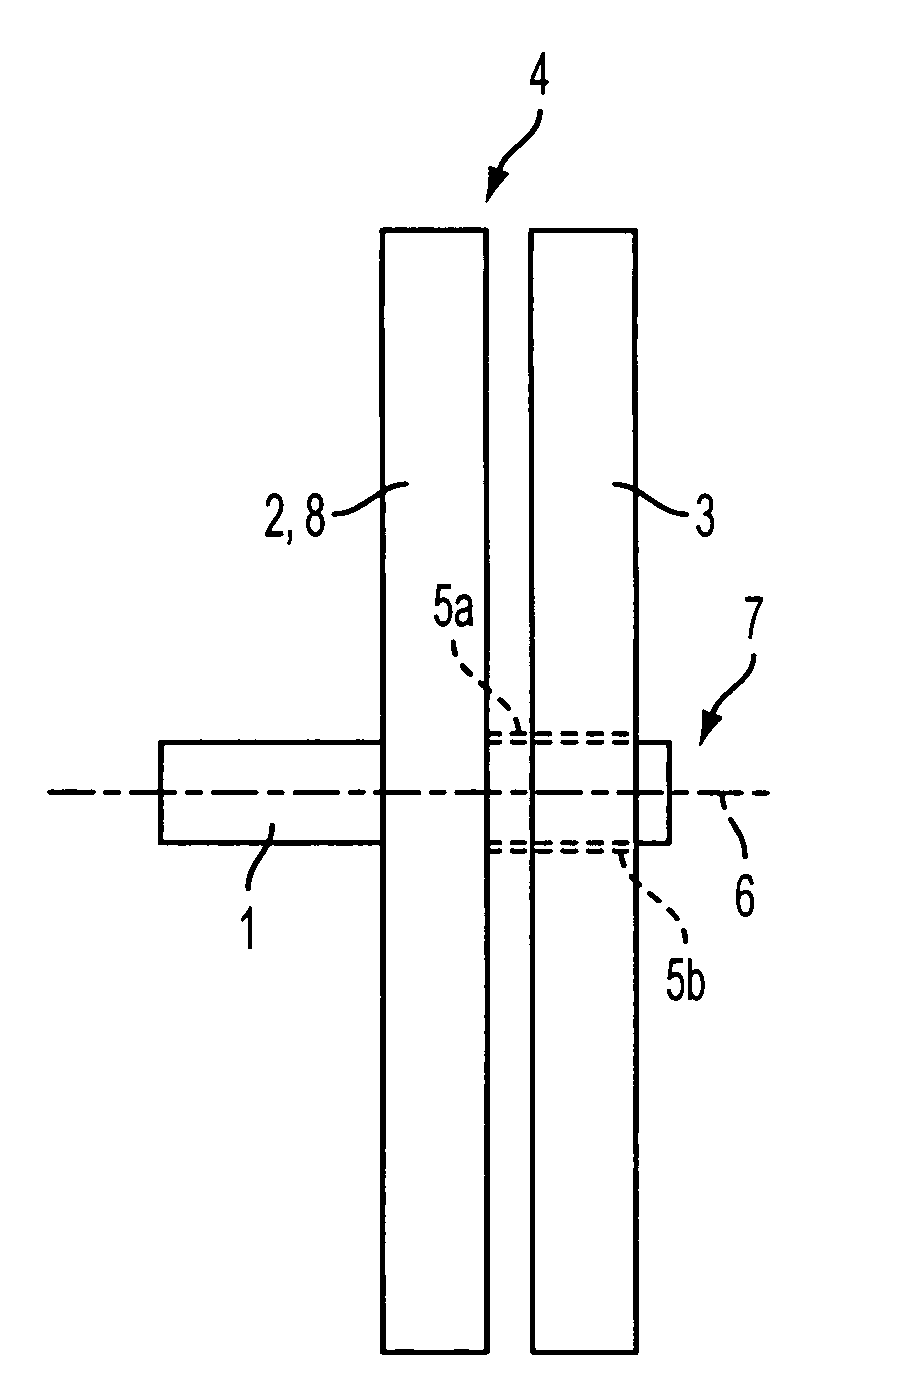 Systems and methods for controlled shutdown and direct start for internal combustion engine